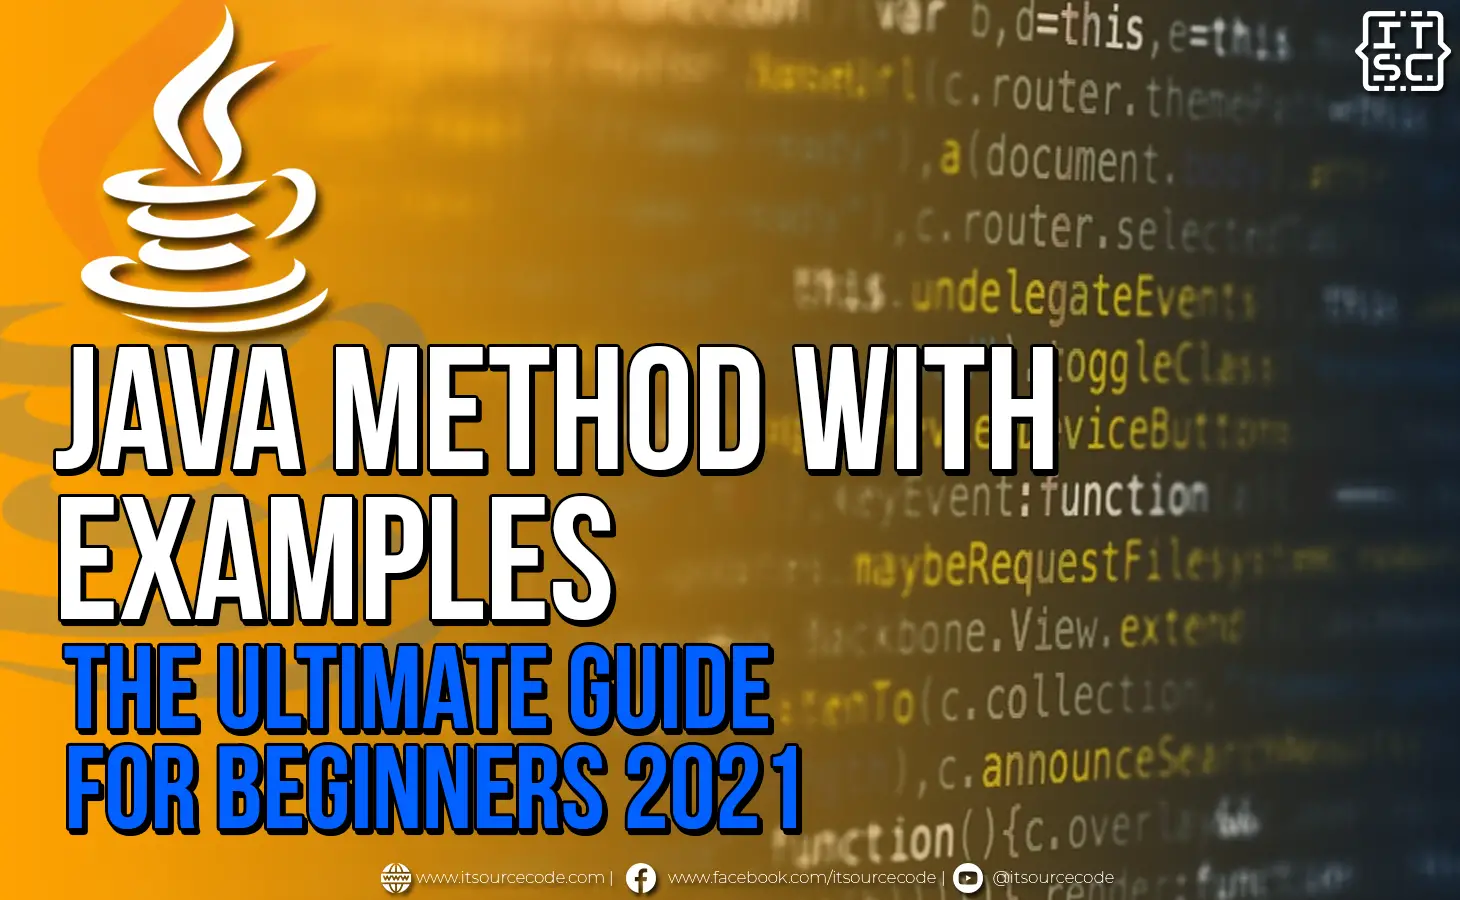 JAVA METHODS WITH EXAMPLES